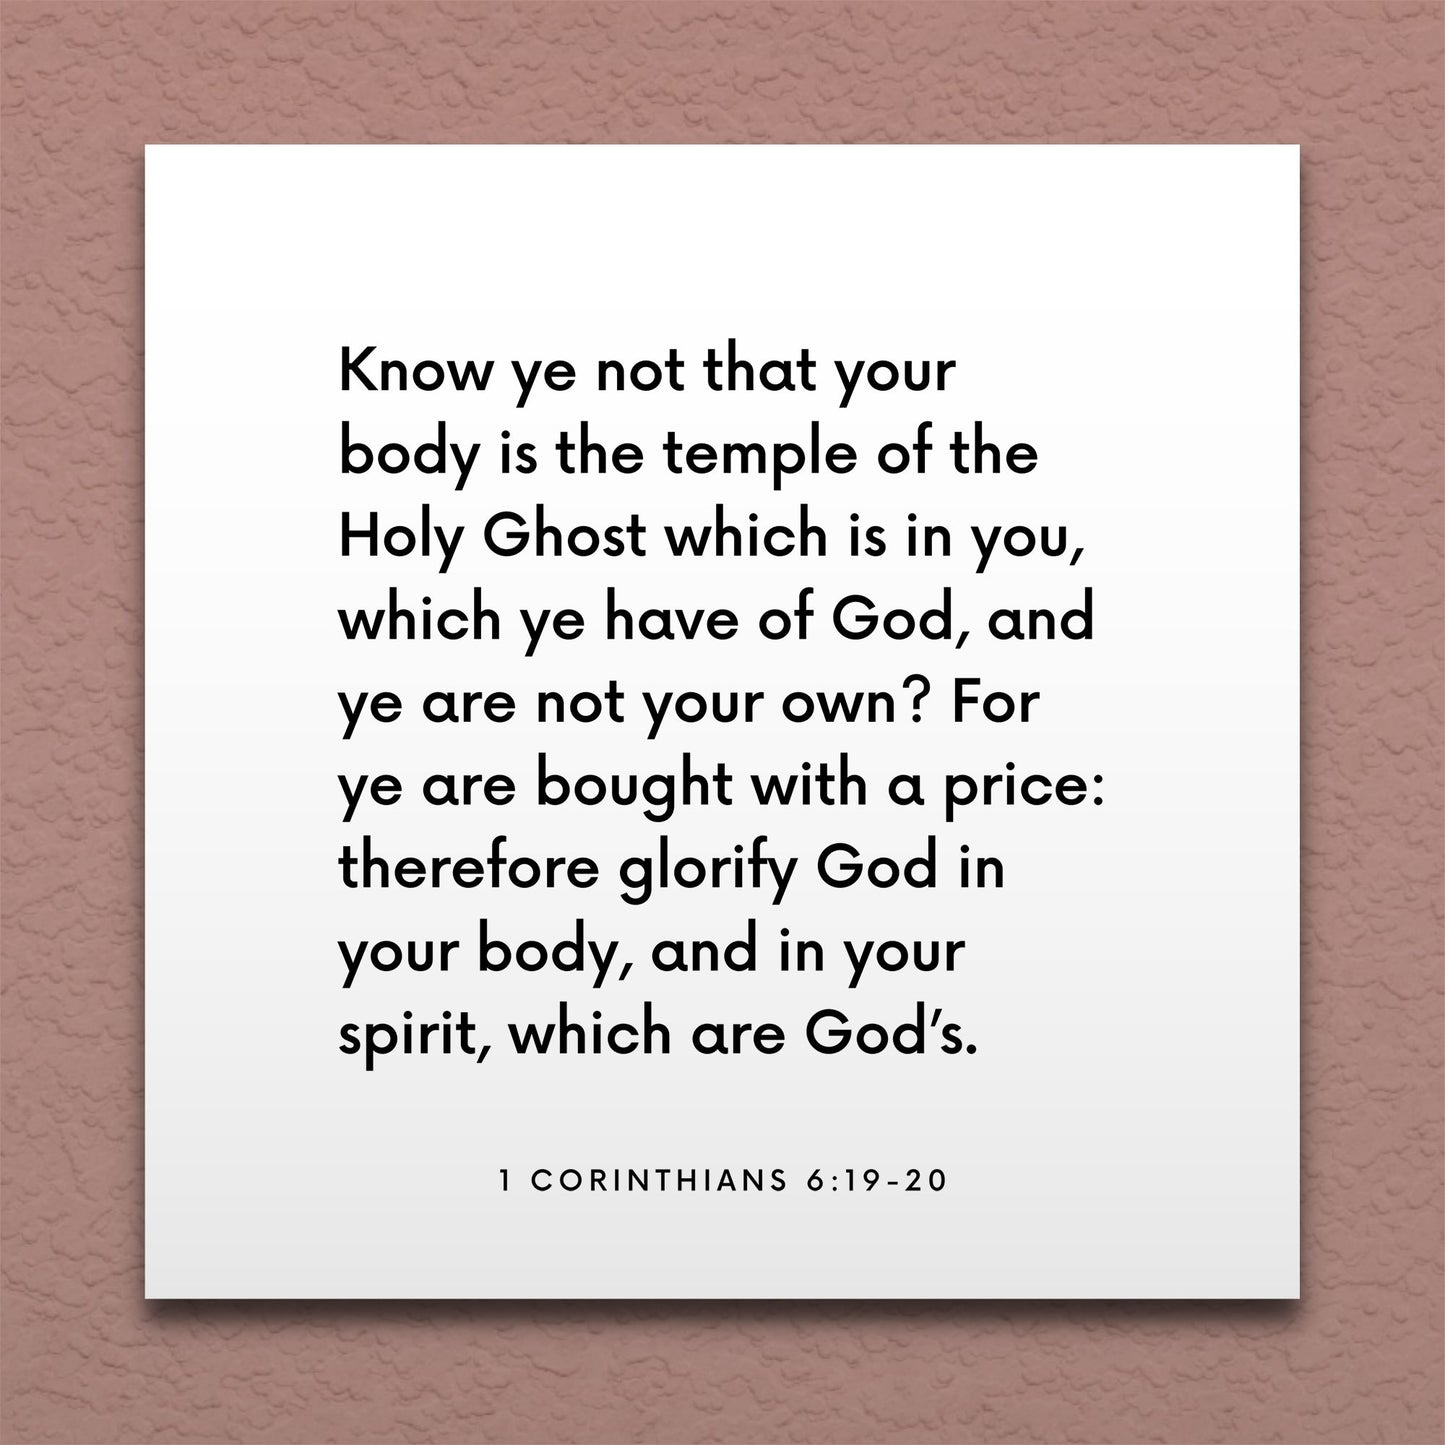 Wall-mounted scripture tile for 1 Corinthians 6:19-20 - "Know ye not that your body is the temple of the Holy Ghost"